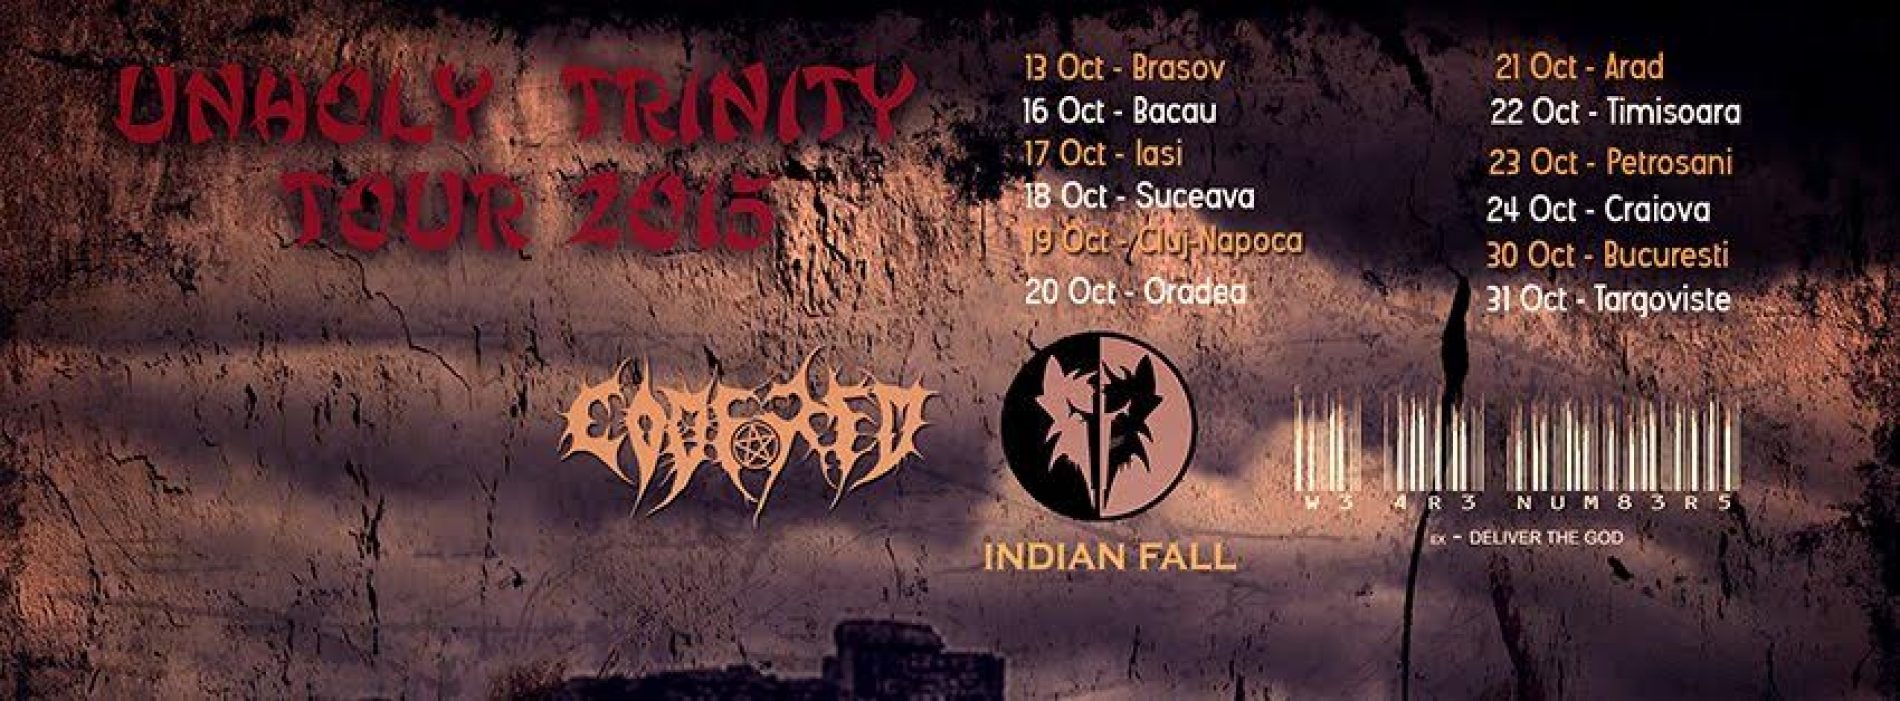 Unholy Trinity Tour 2015: Indian Fall, Code Red, W3 4R3 NUM83R5